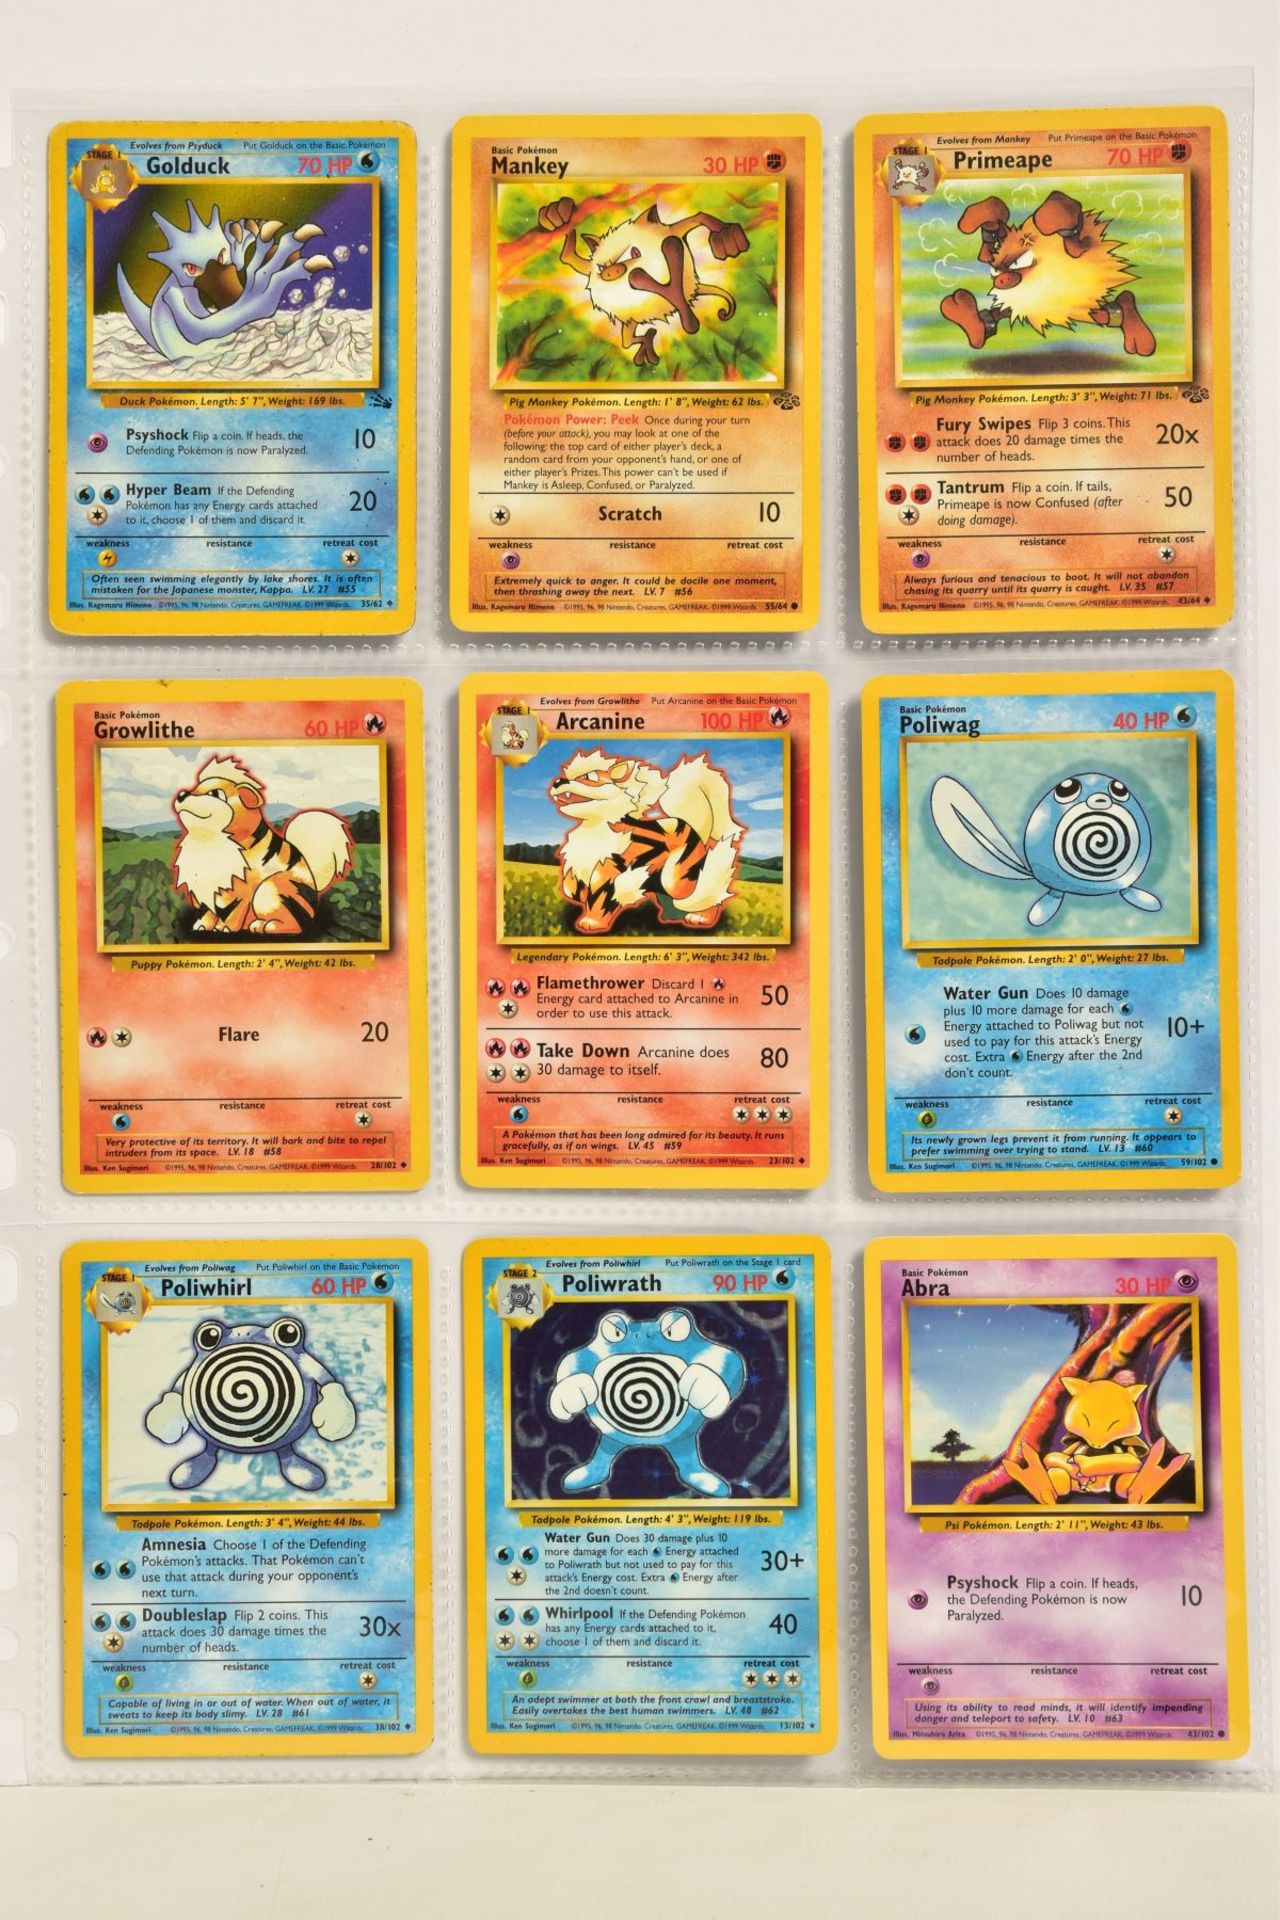 POKEMON THE TRADING CARD GAME 154 CARDS IN POKEMON TCG FOLDER, includes one of each of the - Image 8 of 20